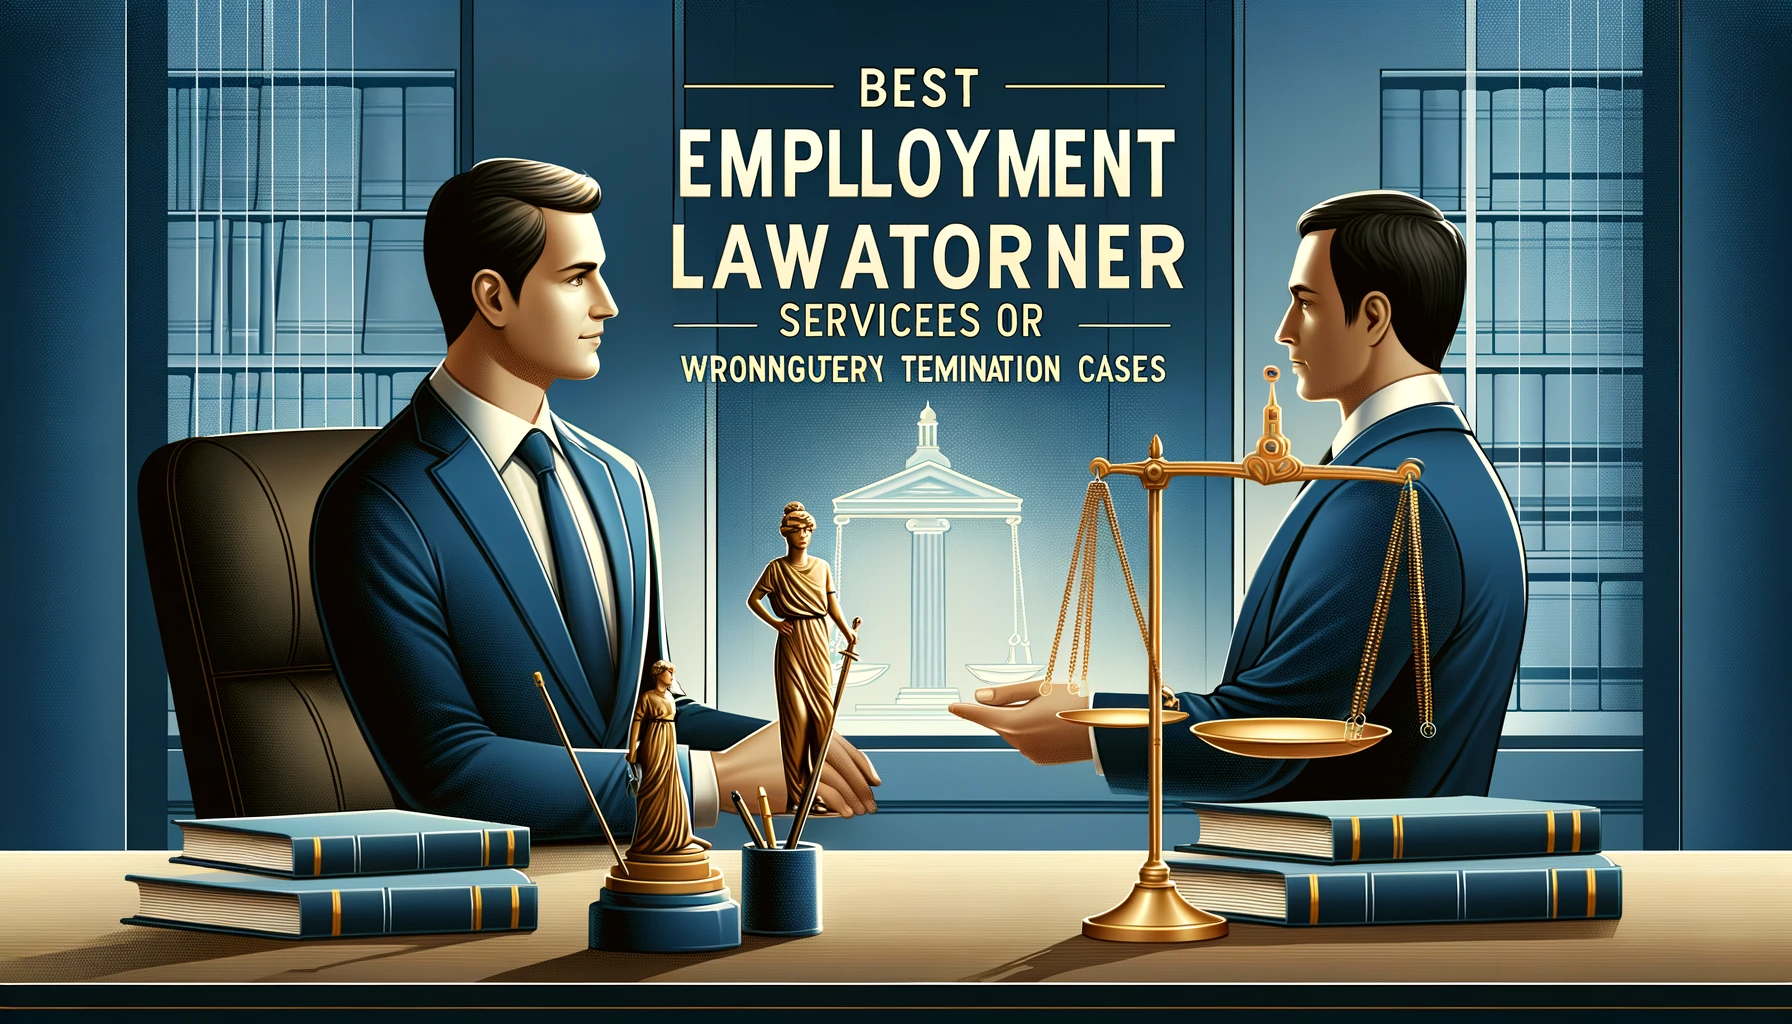 Best Employment Law Attorney Services for Wrongful Termination Cases